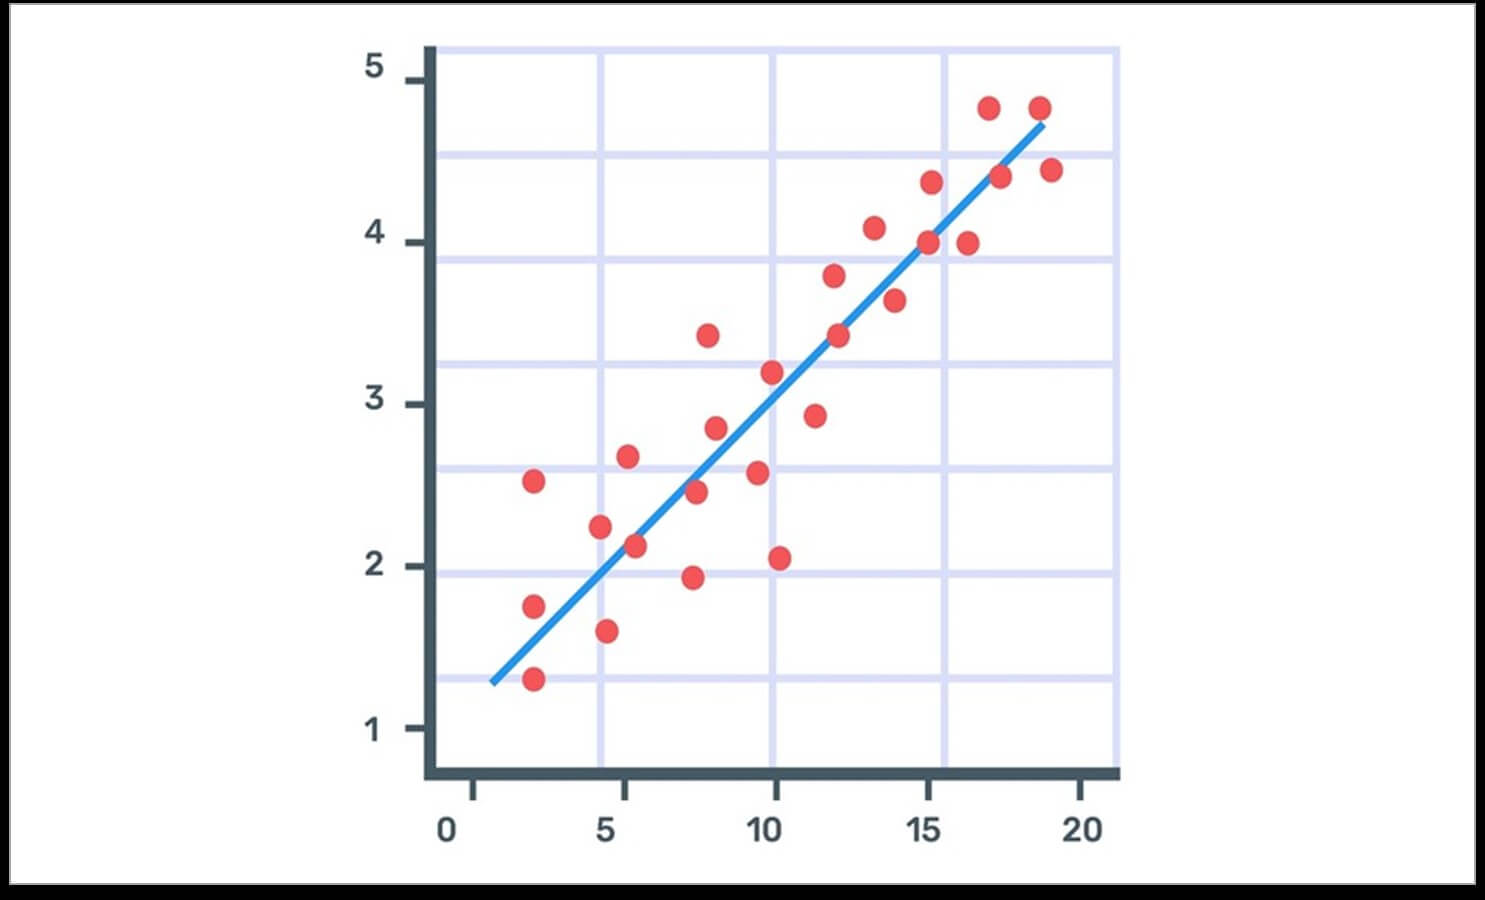 Image of a scatter plot chart.